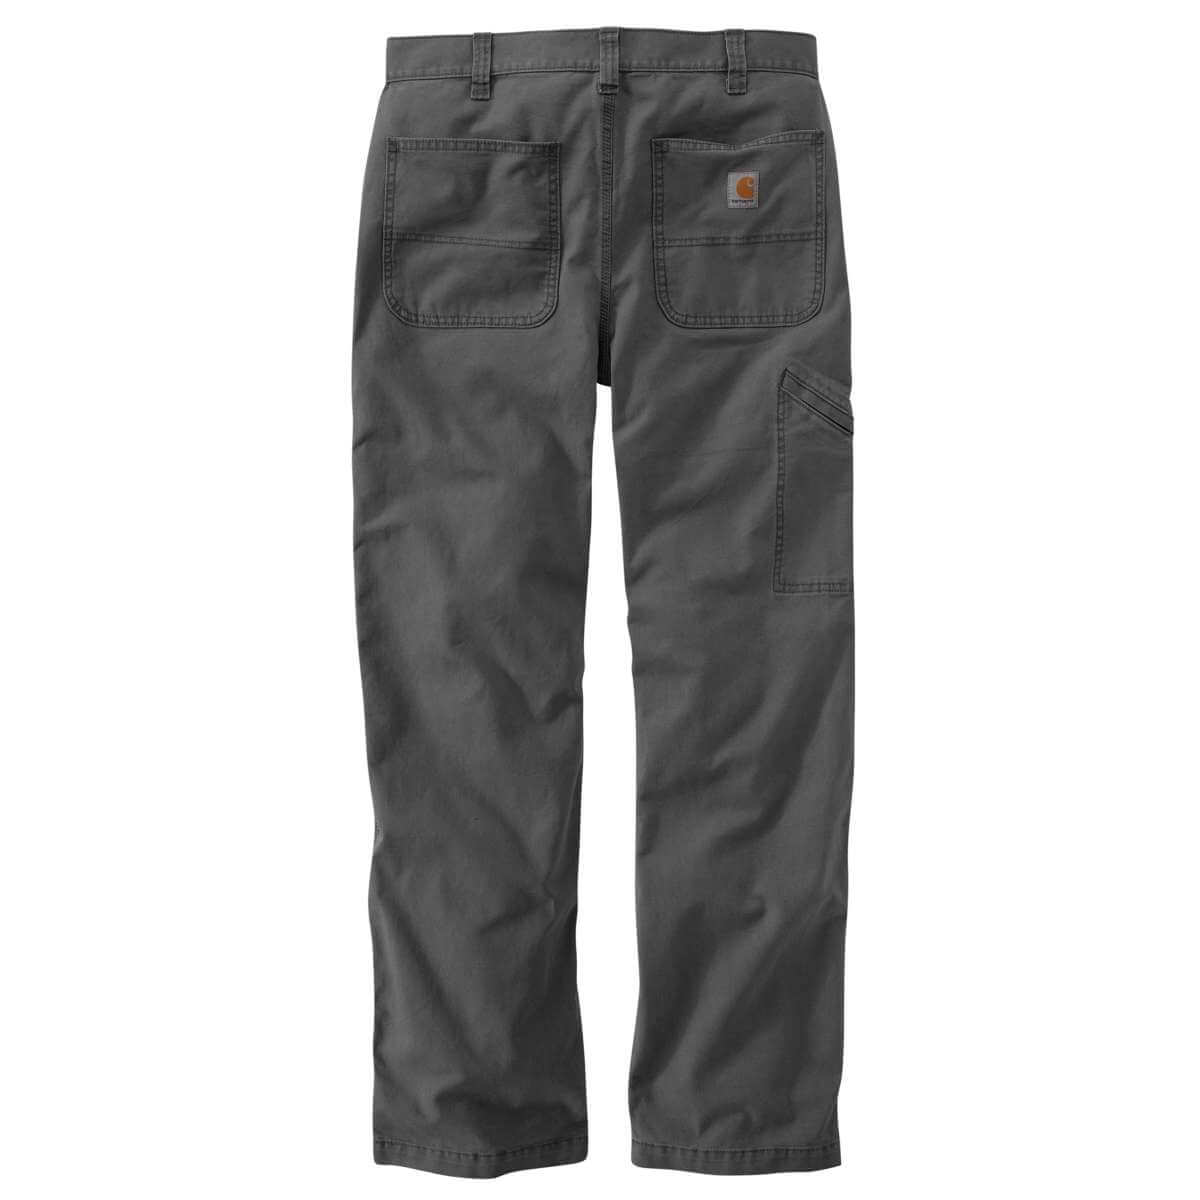 Men's Rugged Flex Relaxed Fit Canvas Cargo Work Pant